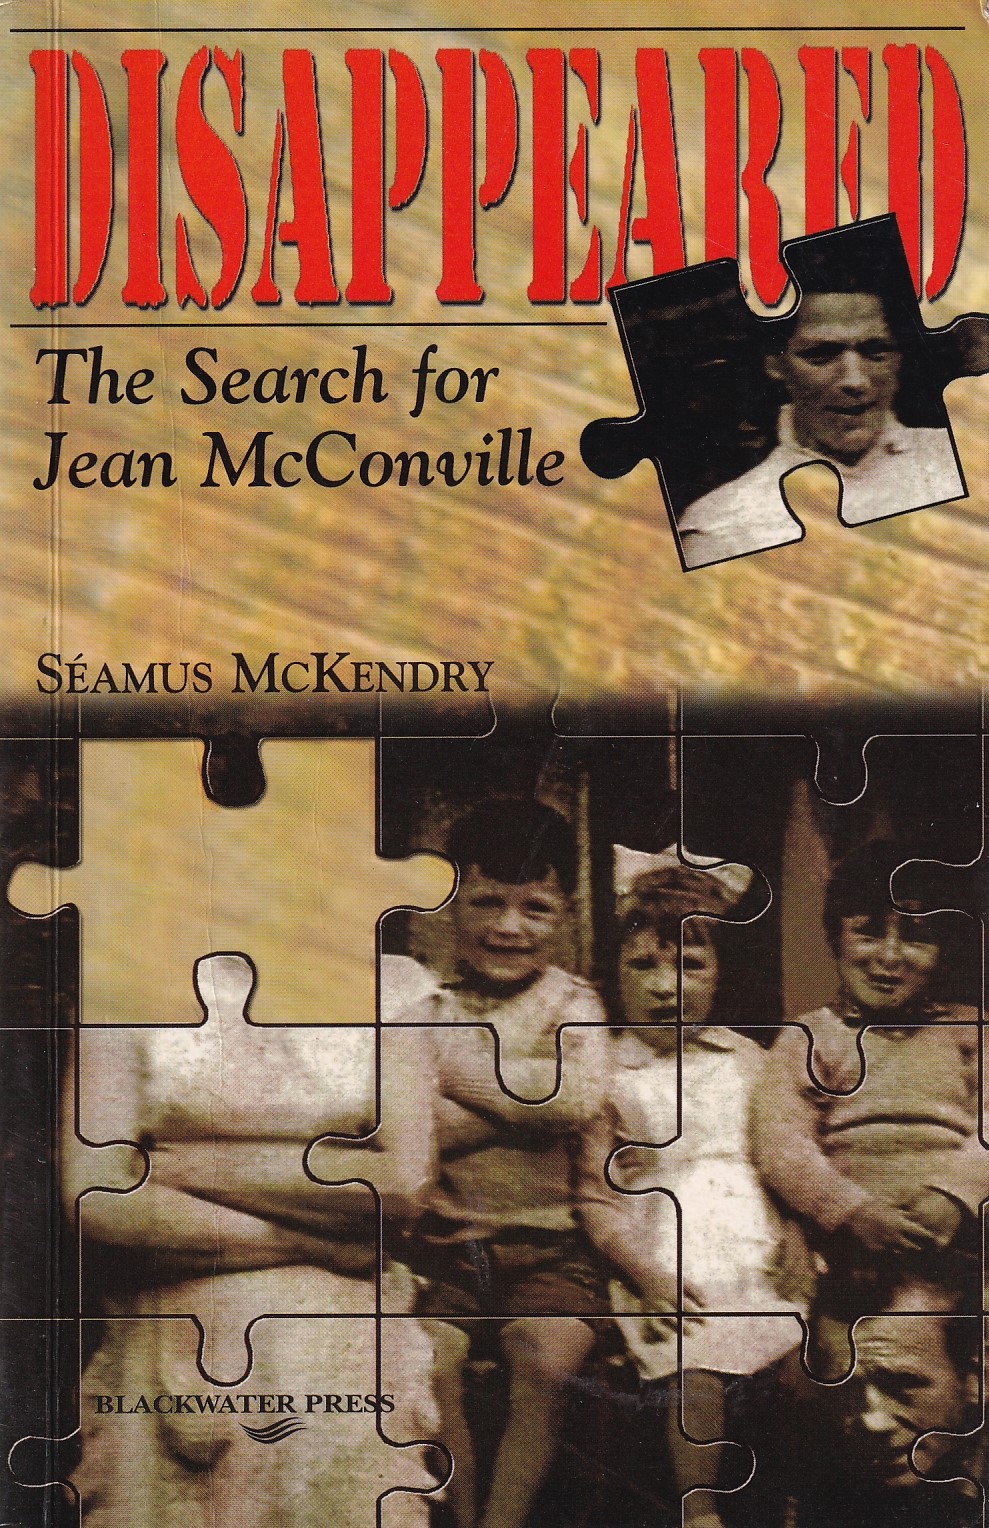 Disappeared: The search for Jean McConville | Séamus McKendry | Charlie Byrne's